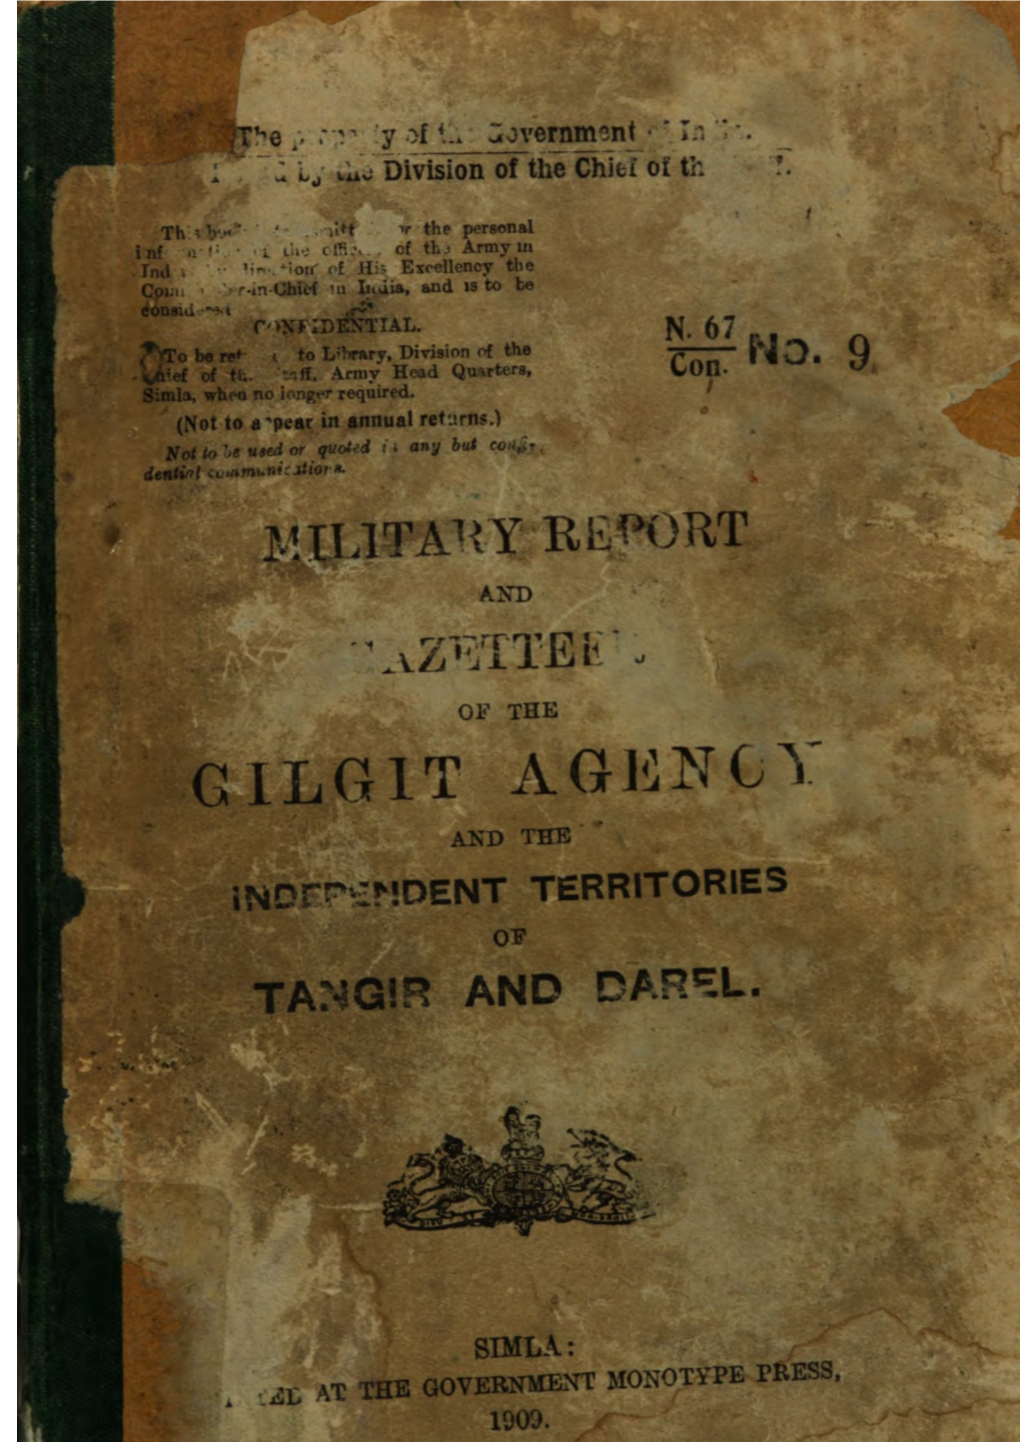 Military Report and Gazetteer of the Gilgit Agency and The